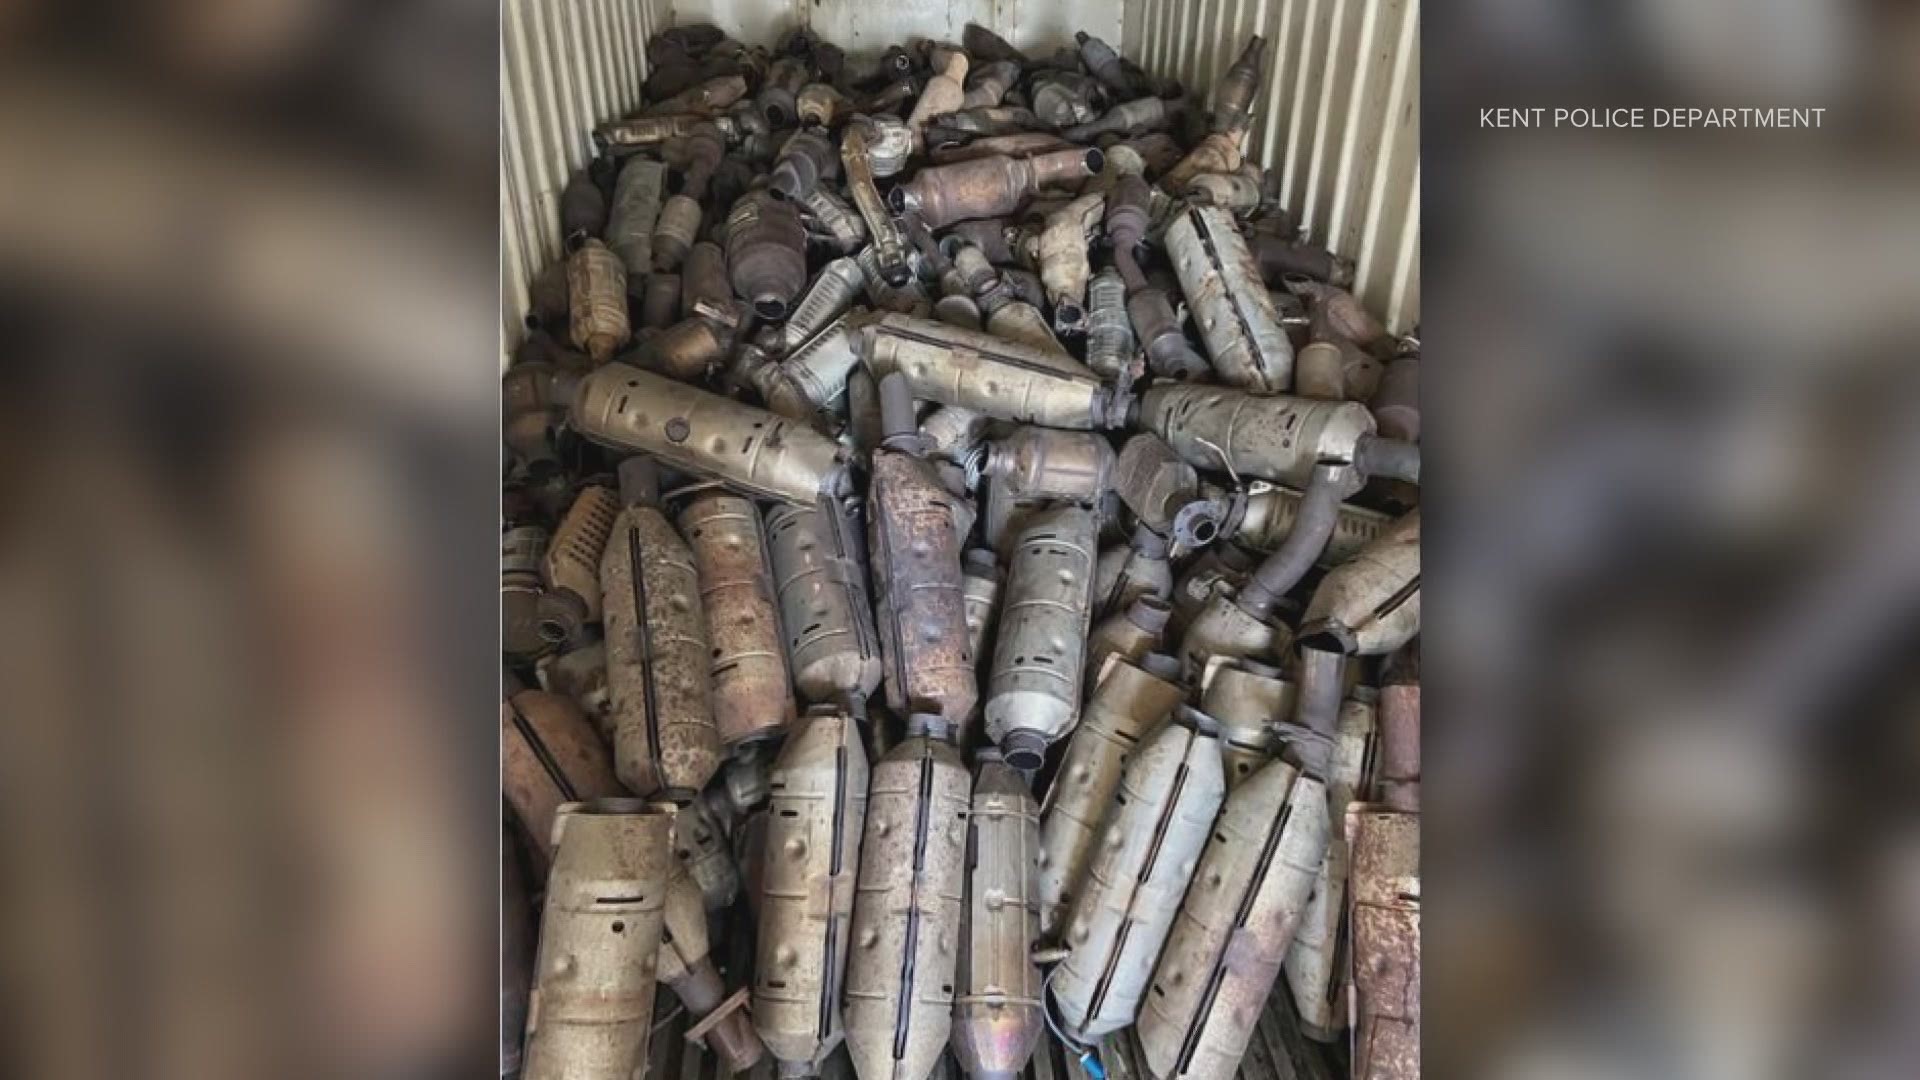 Multiple suspects were arrested and $40,000 in cash was recovered following an investigation into rampant catalytic converter thefts throughout the region.